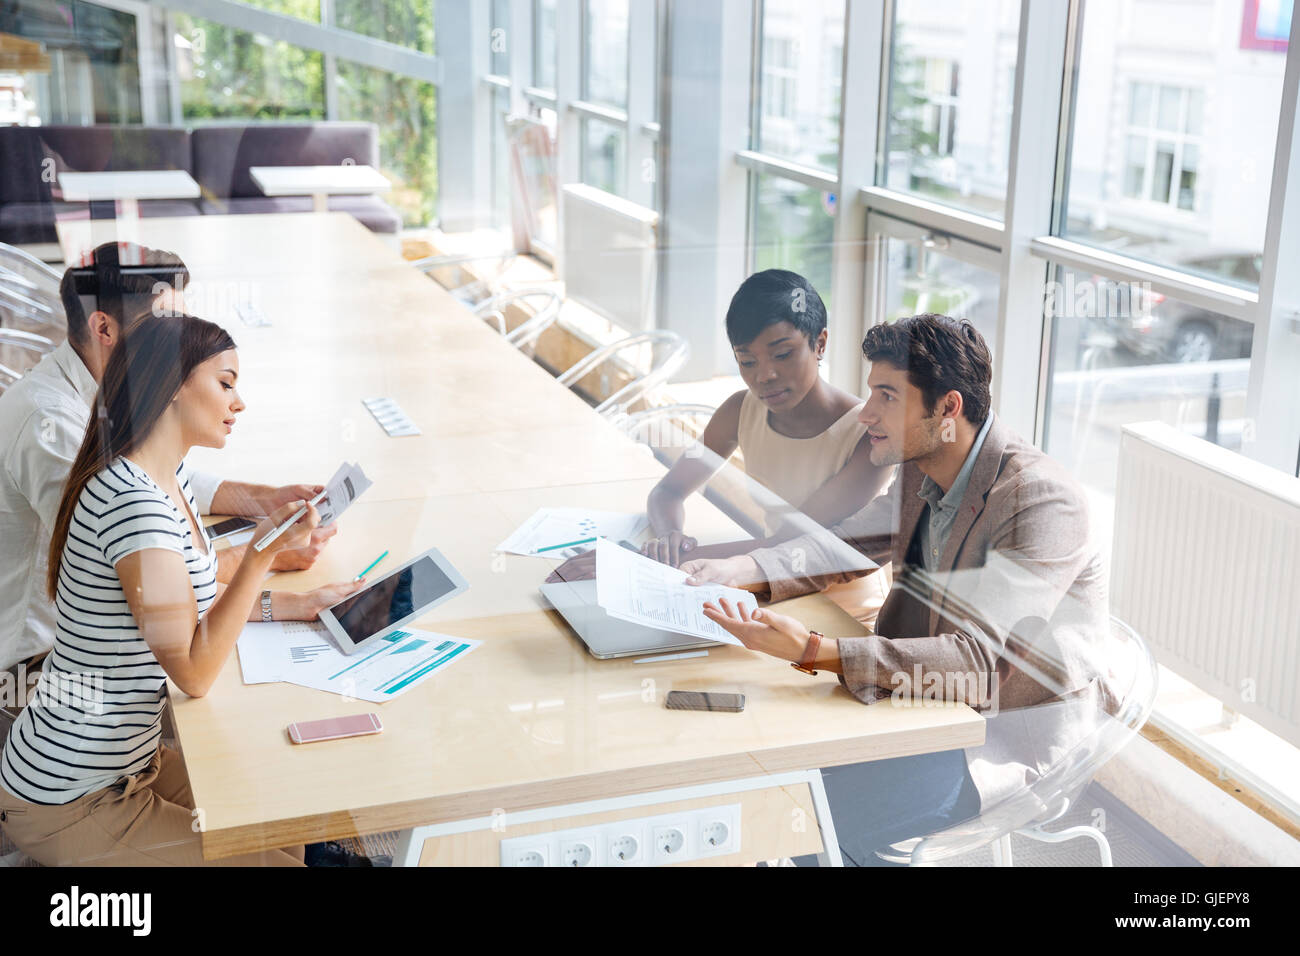 Multiethnic group of young businesspeople working together in conference room Stock Photo